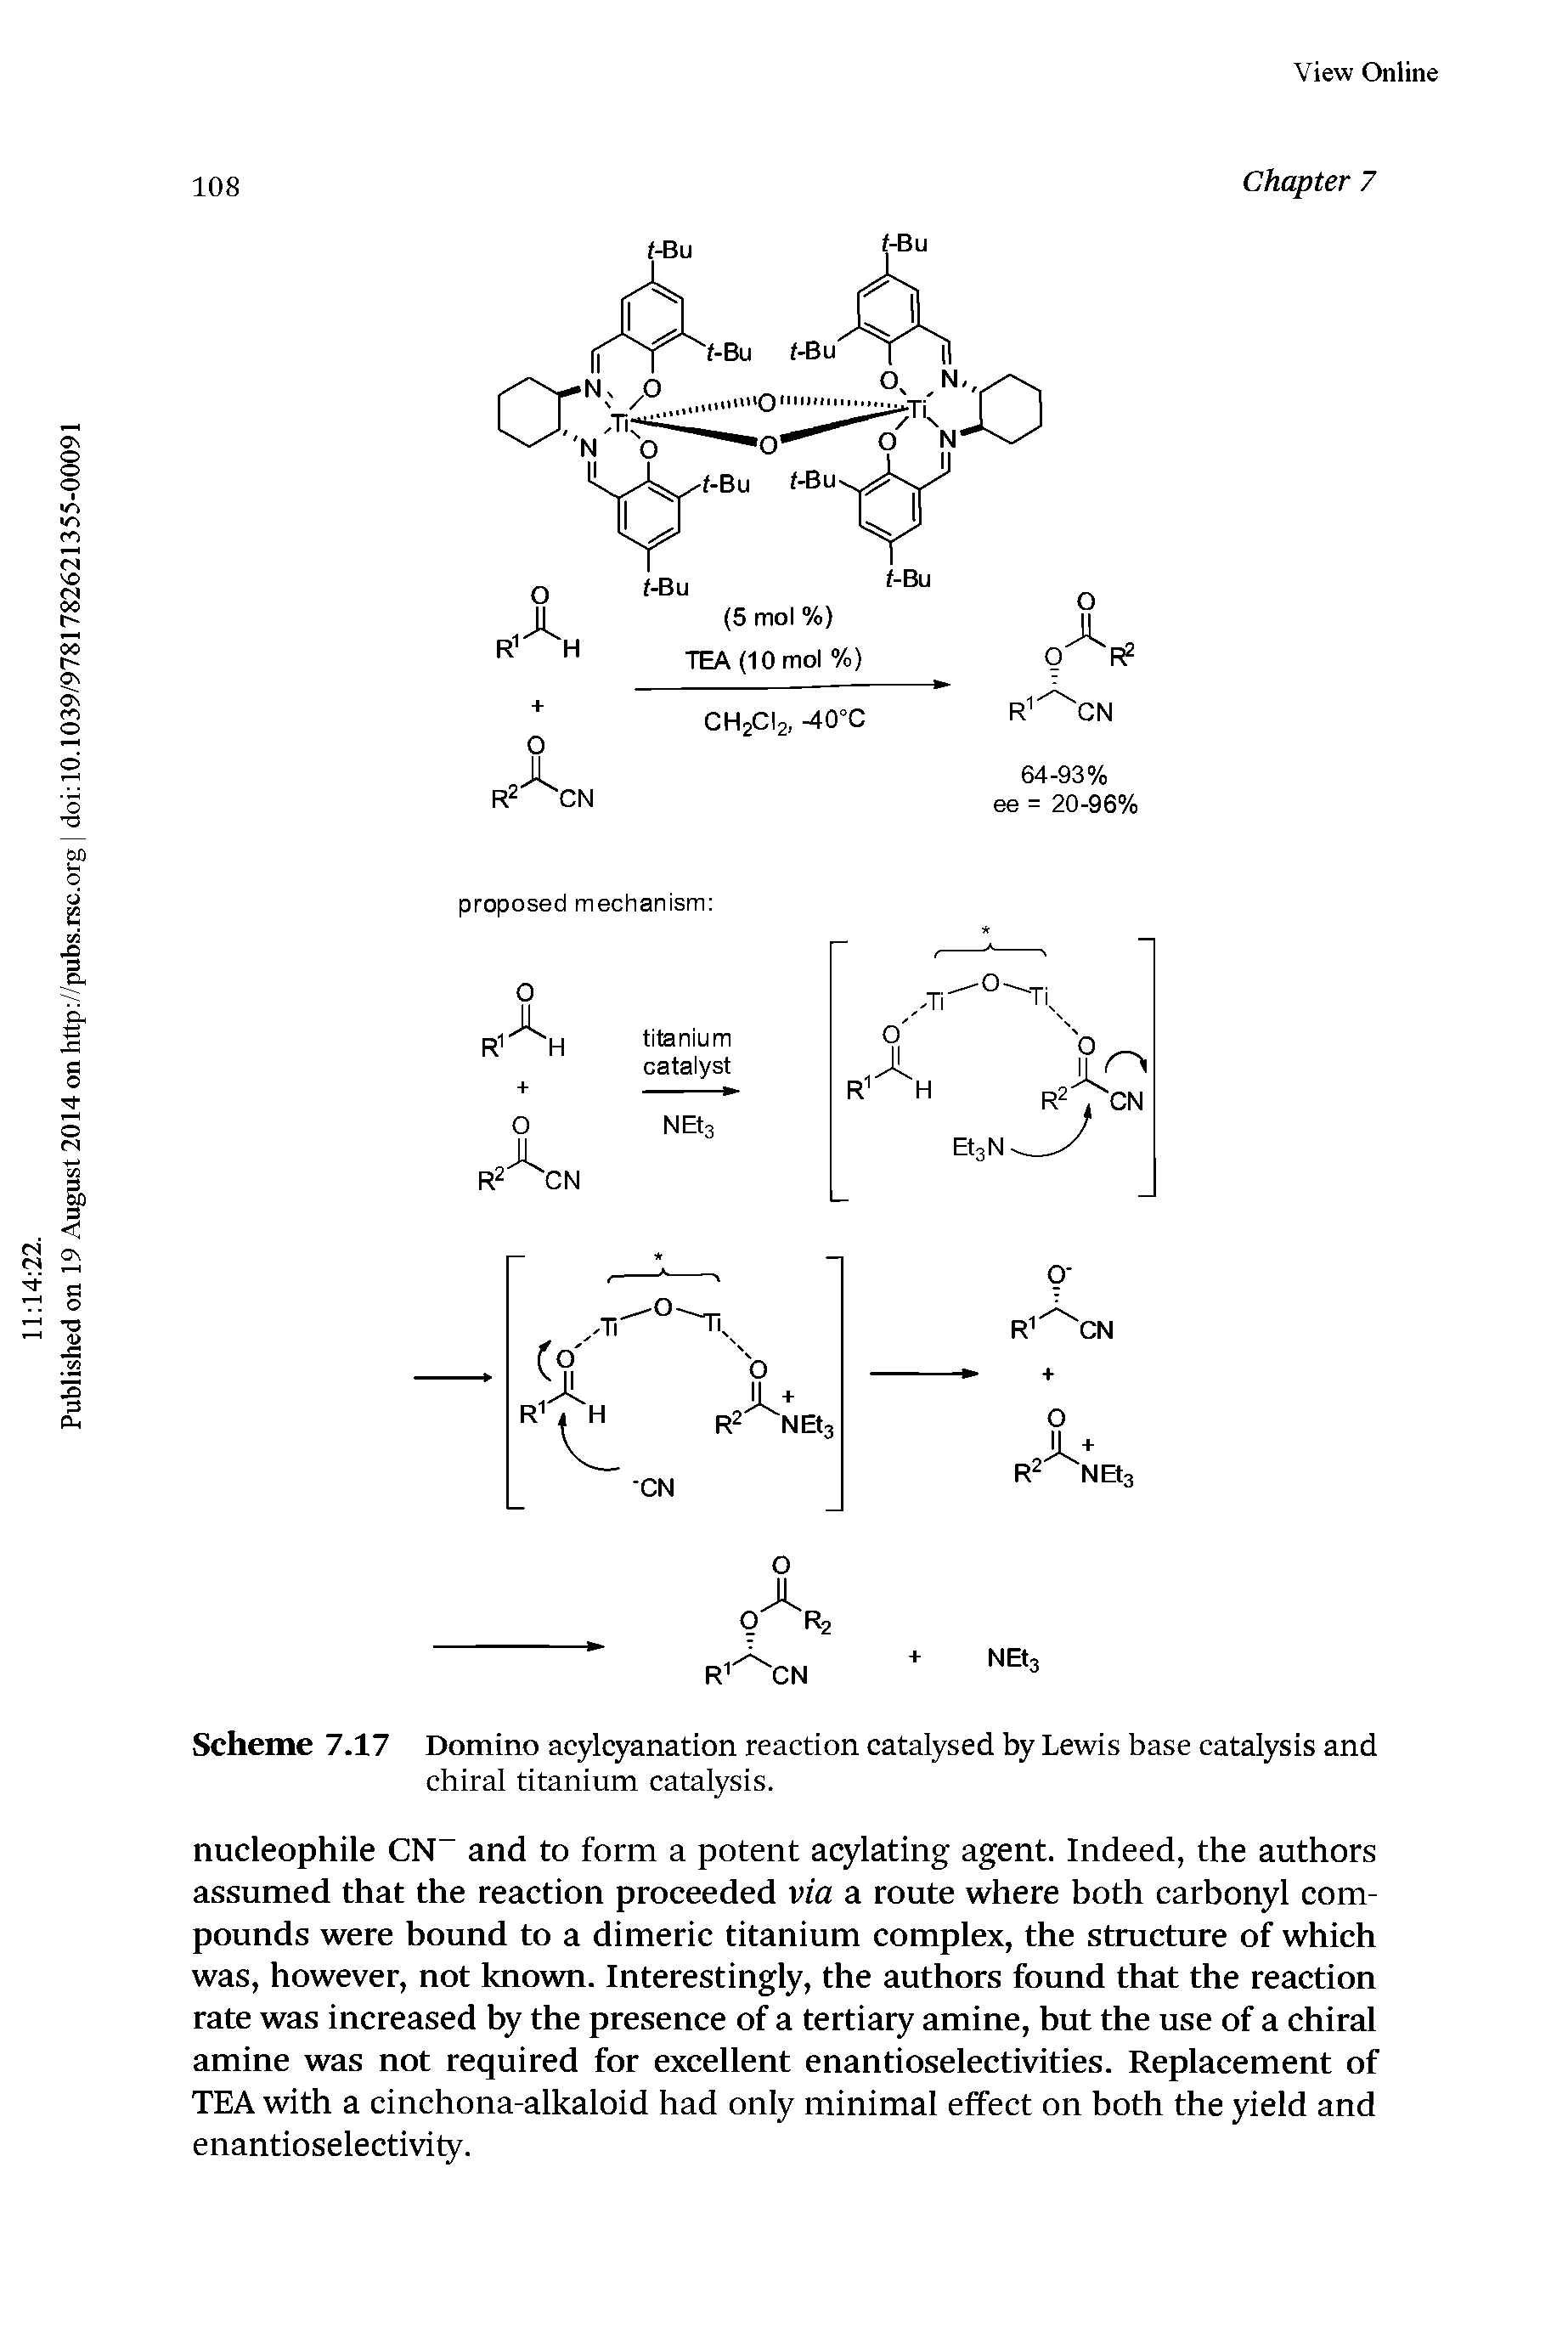 Scheme 7.17 Domino acylqtanation reaction catalysed by Lewis base catalysis and chiral titanium catalysis.